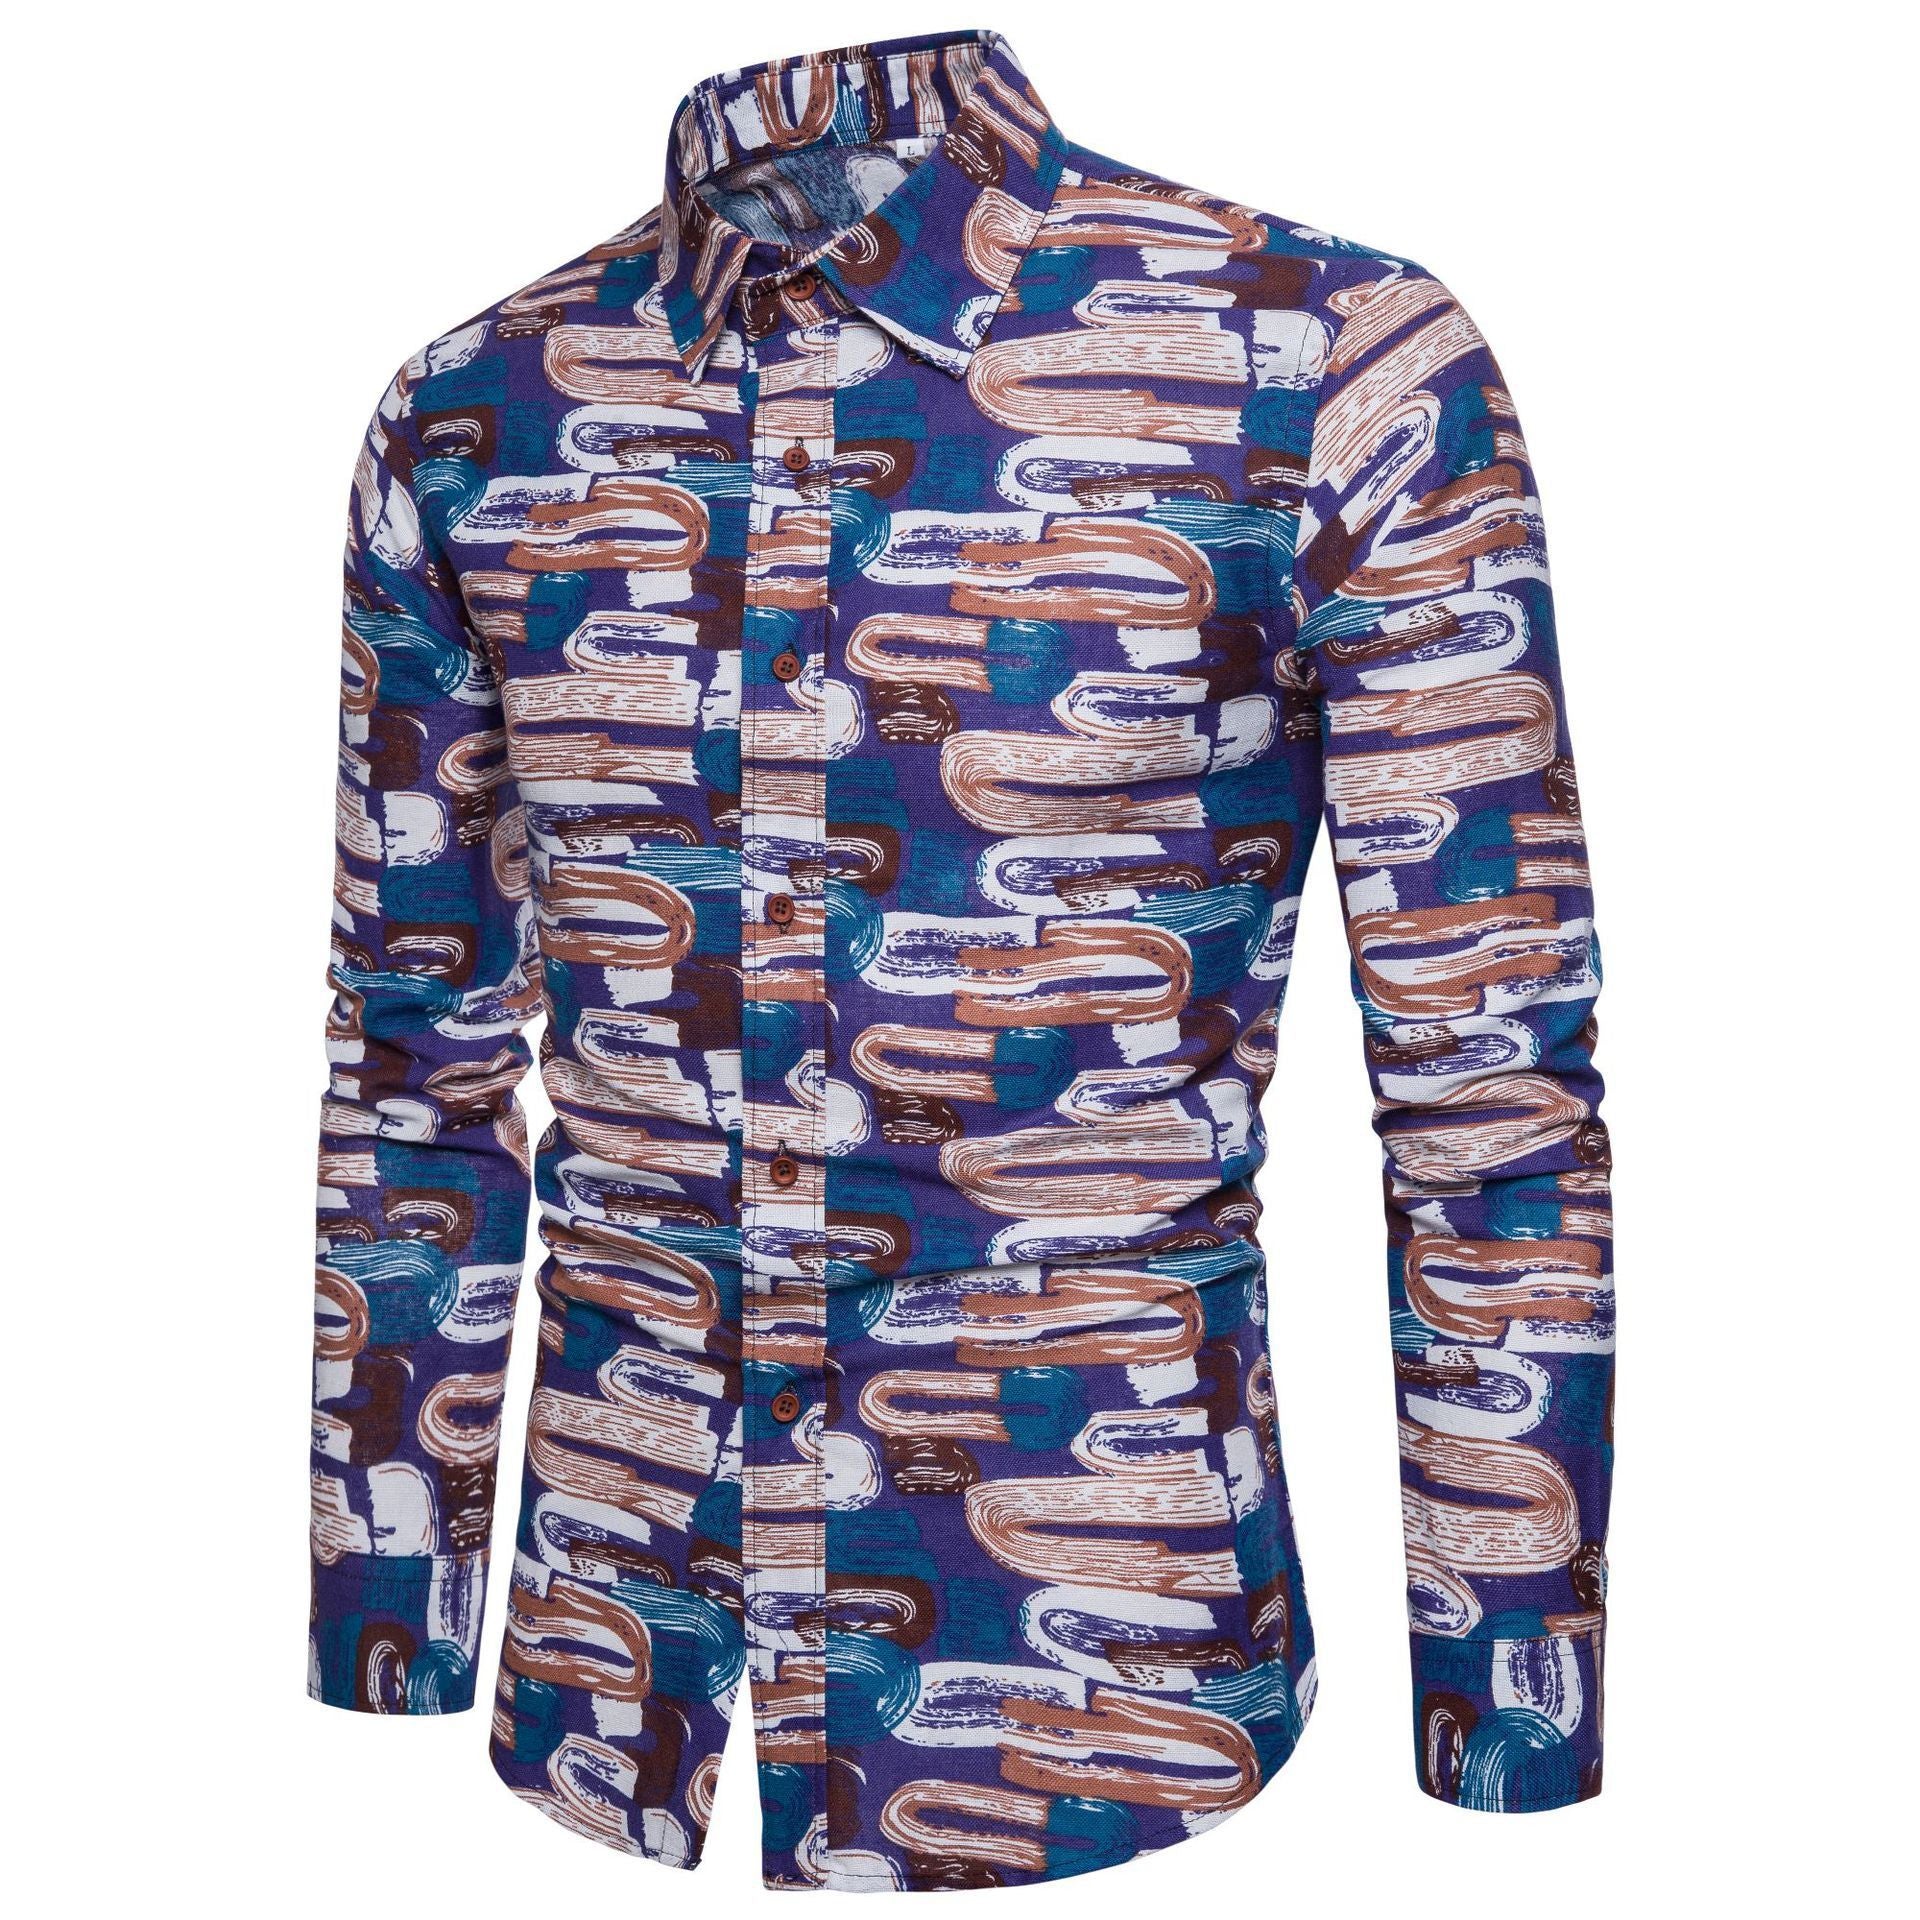 Unwind in Style: Men's Long Sleeve Hawaiian Shirt. Relaxed fit and vibrant tropical prints for effortless island vibes.